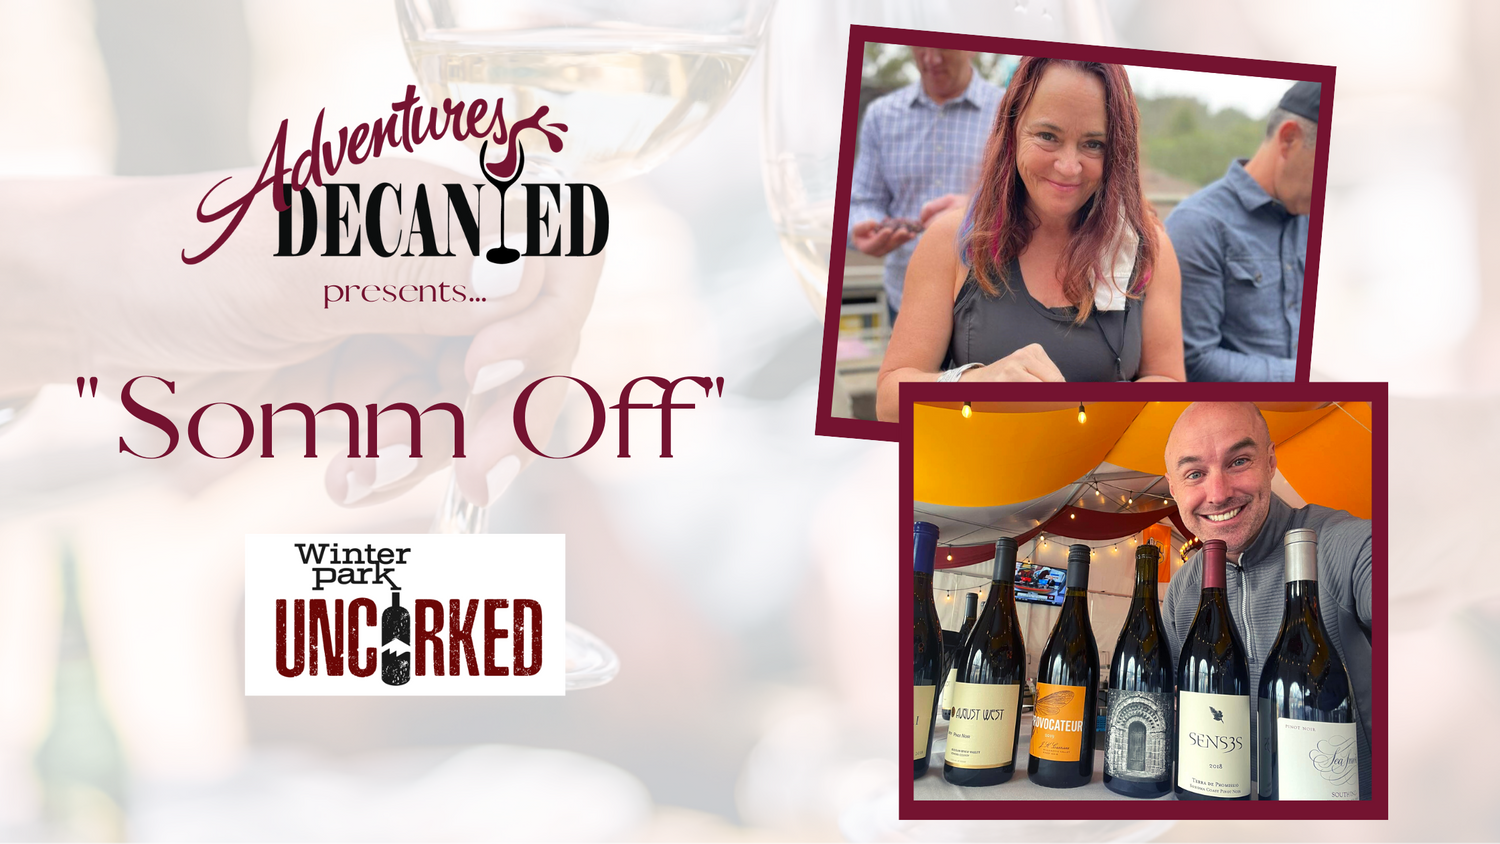 “Somm-Off”: Saturday, July 30th, 2:45 PM - VIP Event